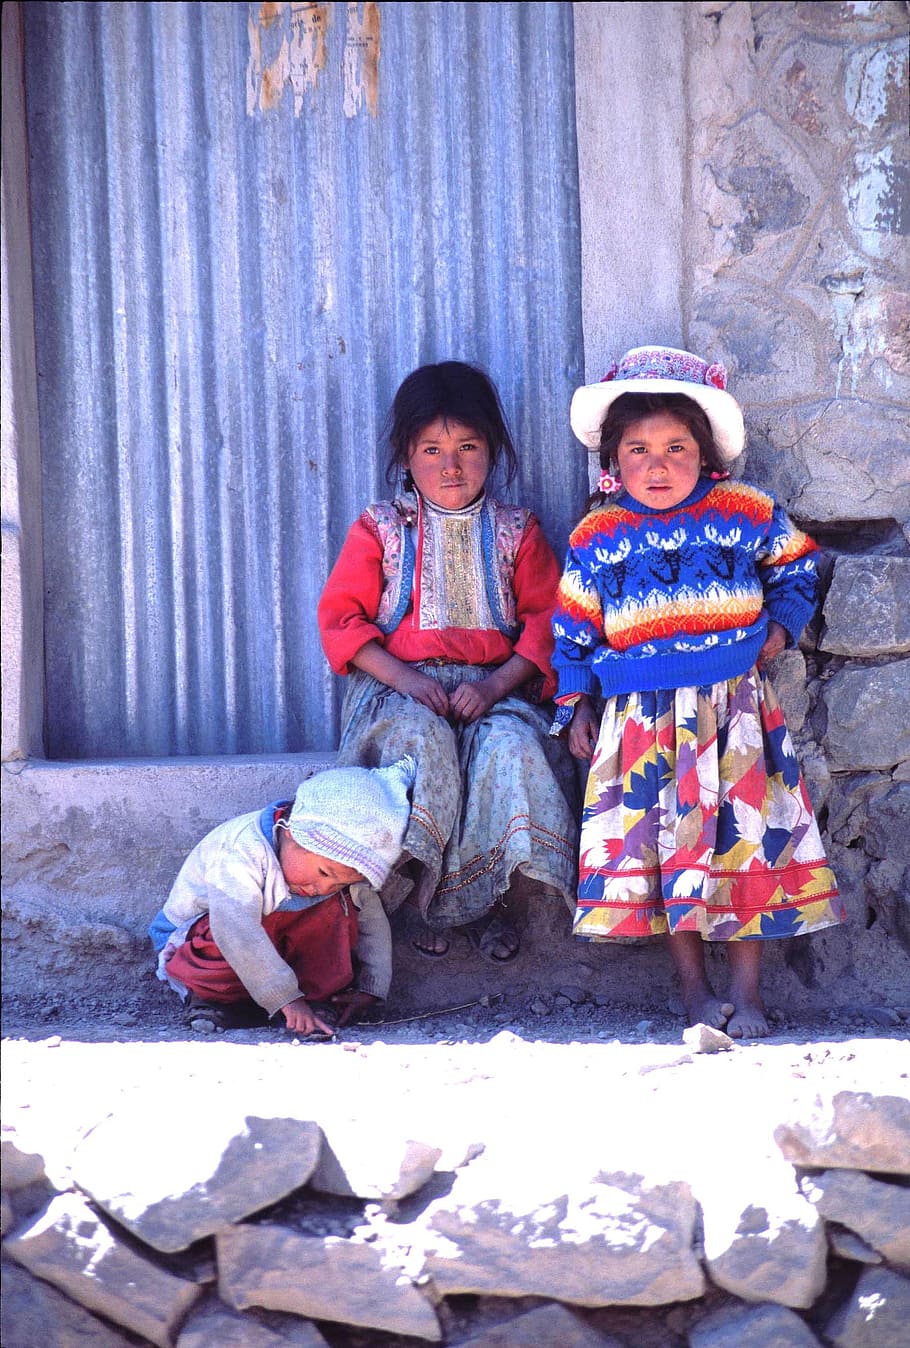 two, girls, one, boy, leaning, concrete, wall, peru, children, colorful